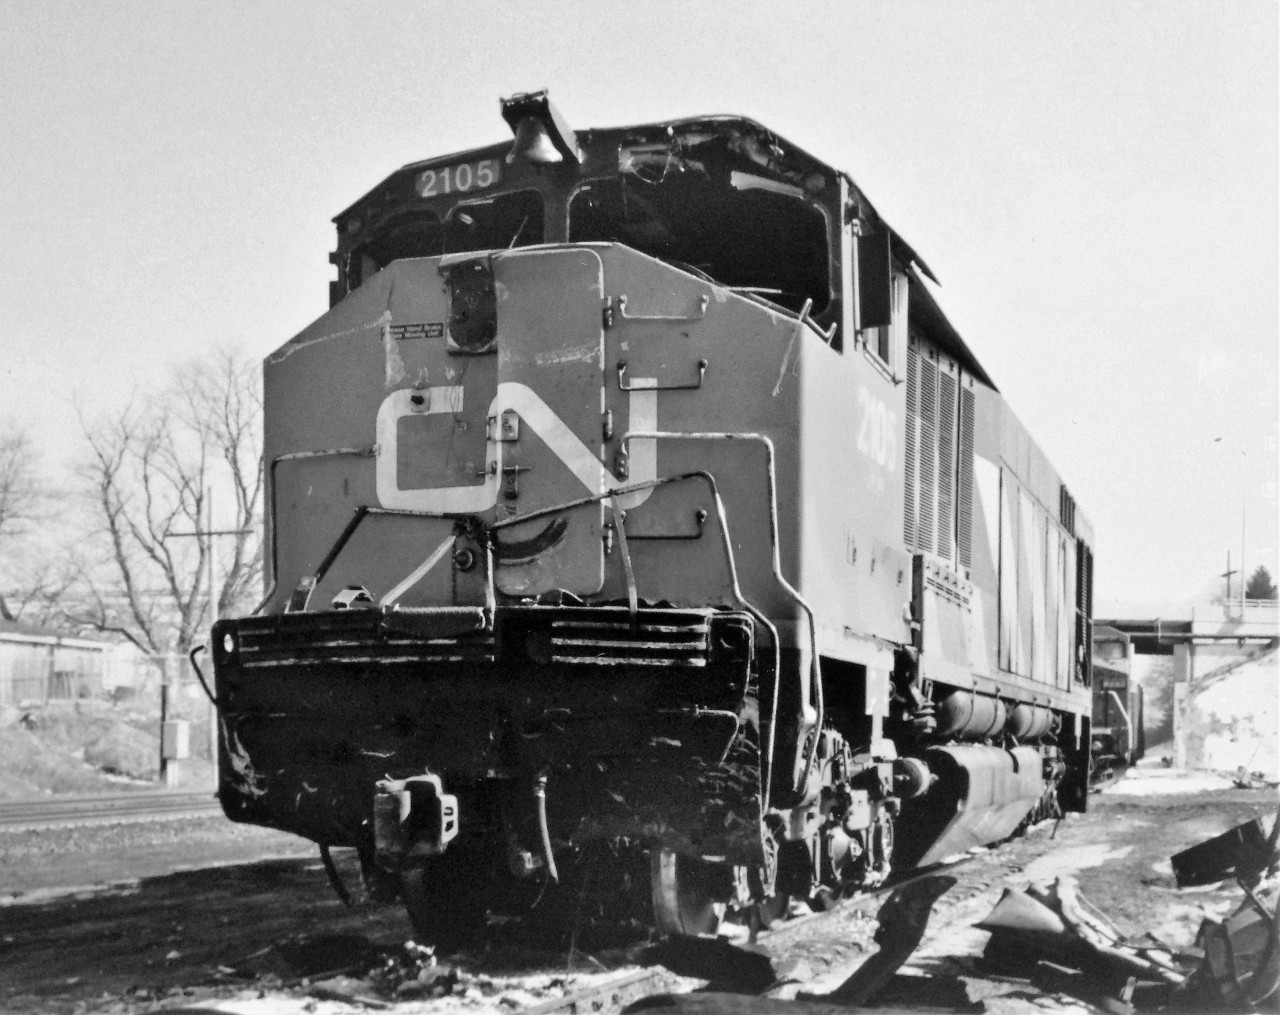 The aftermath. The remains of CN HR616 2105 are seen two days after being in the lead of train 272 when it was involved in a major rear-end collision on the Strathroy Subdivision. The unit was on the point of the eastbound train, when it rear-ended standing manifest 308 at Hyde Park. In turn, the force of the impact pushed train 308 into the rear of train 223, another standing freight which was stopped ahead of it. The collision was enough to derail both 2105 and second unit, LMSX C40-8W 723. The locomotives suffered heavy damage, with 2105 bearing the worst of it. Fortunately, the crews involved escaped with non-life threatening injuries. The LMSX lessor would be repaired, however 2105 was subsequently retired on October 26, 1995 after it was determined the damage was too extensive and it would be too costly to repair the aging locomotive. The Transportation Safety Board later determined that the locomotive engineer of train 272 missed a restrictive signal indication west of Hyde Park, but was unable to slow the train down as it approached and struck the stopped 308. This is a follow-up to the series of photos that John Pittman recently posted on the incident.